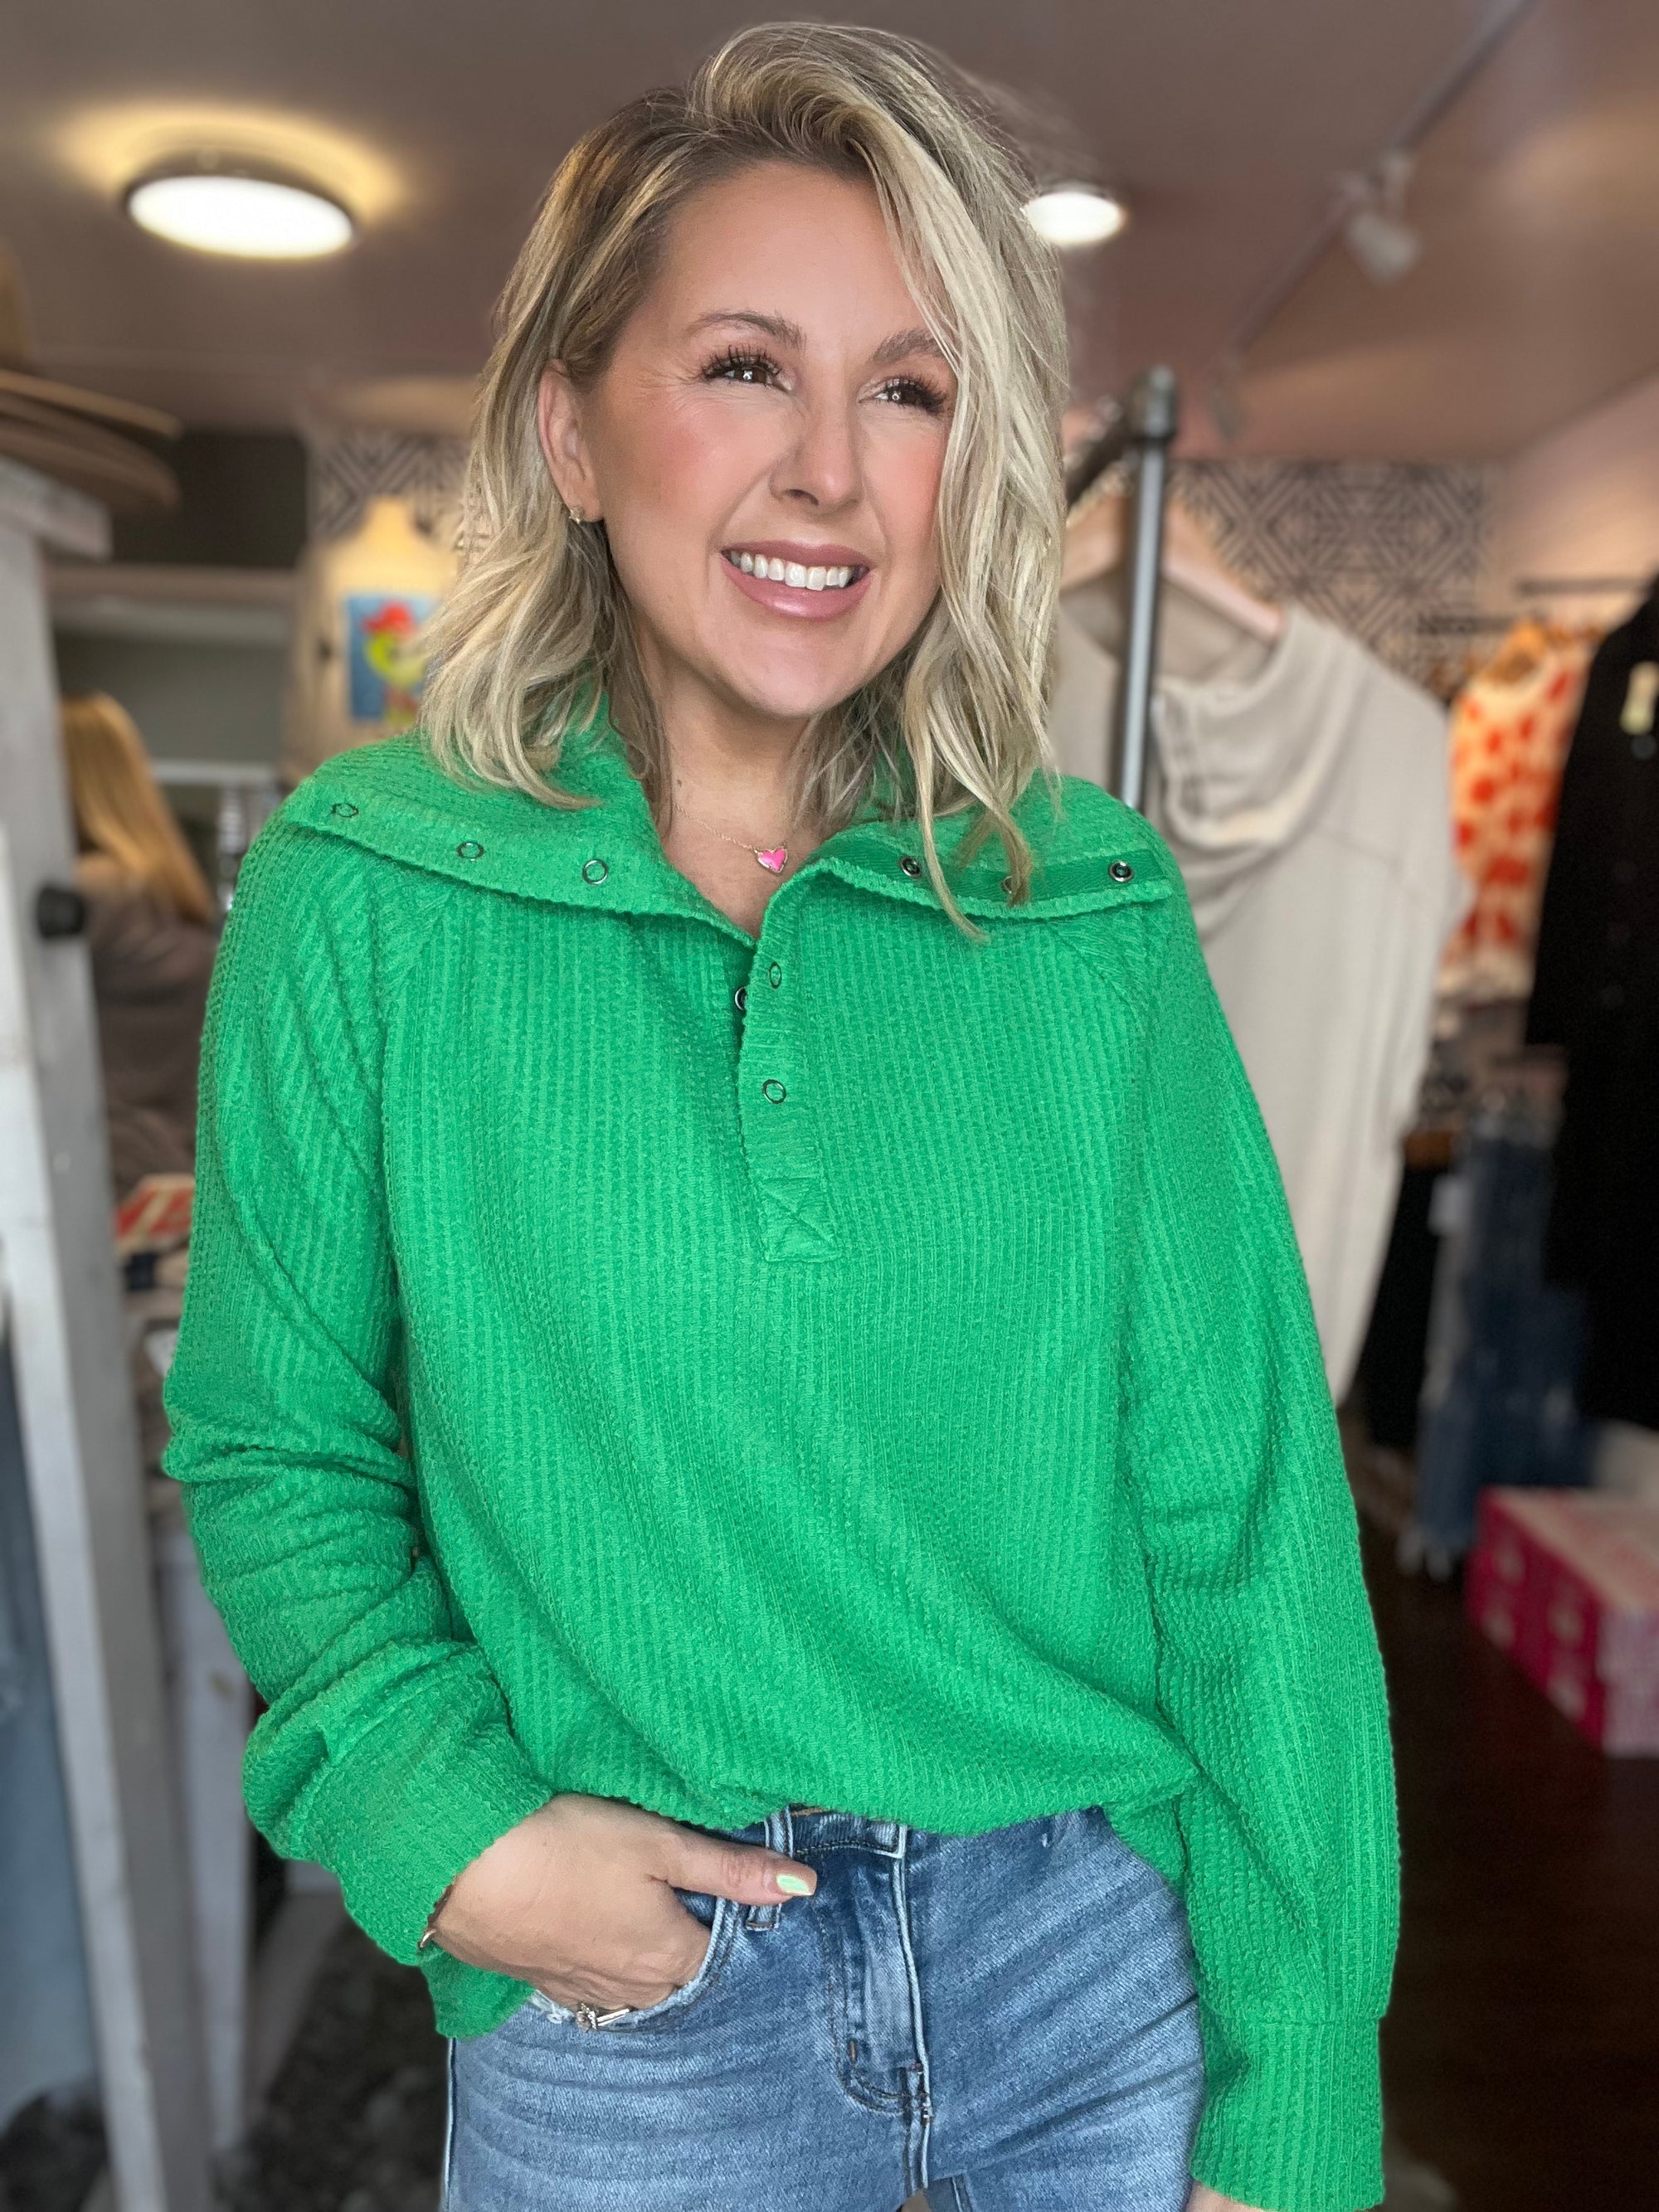 Kelly Green Wide Collar Textured Knit Top